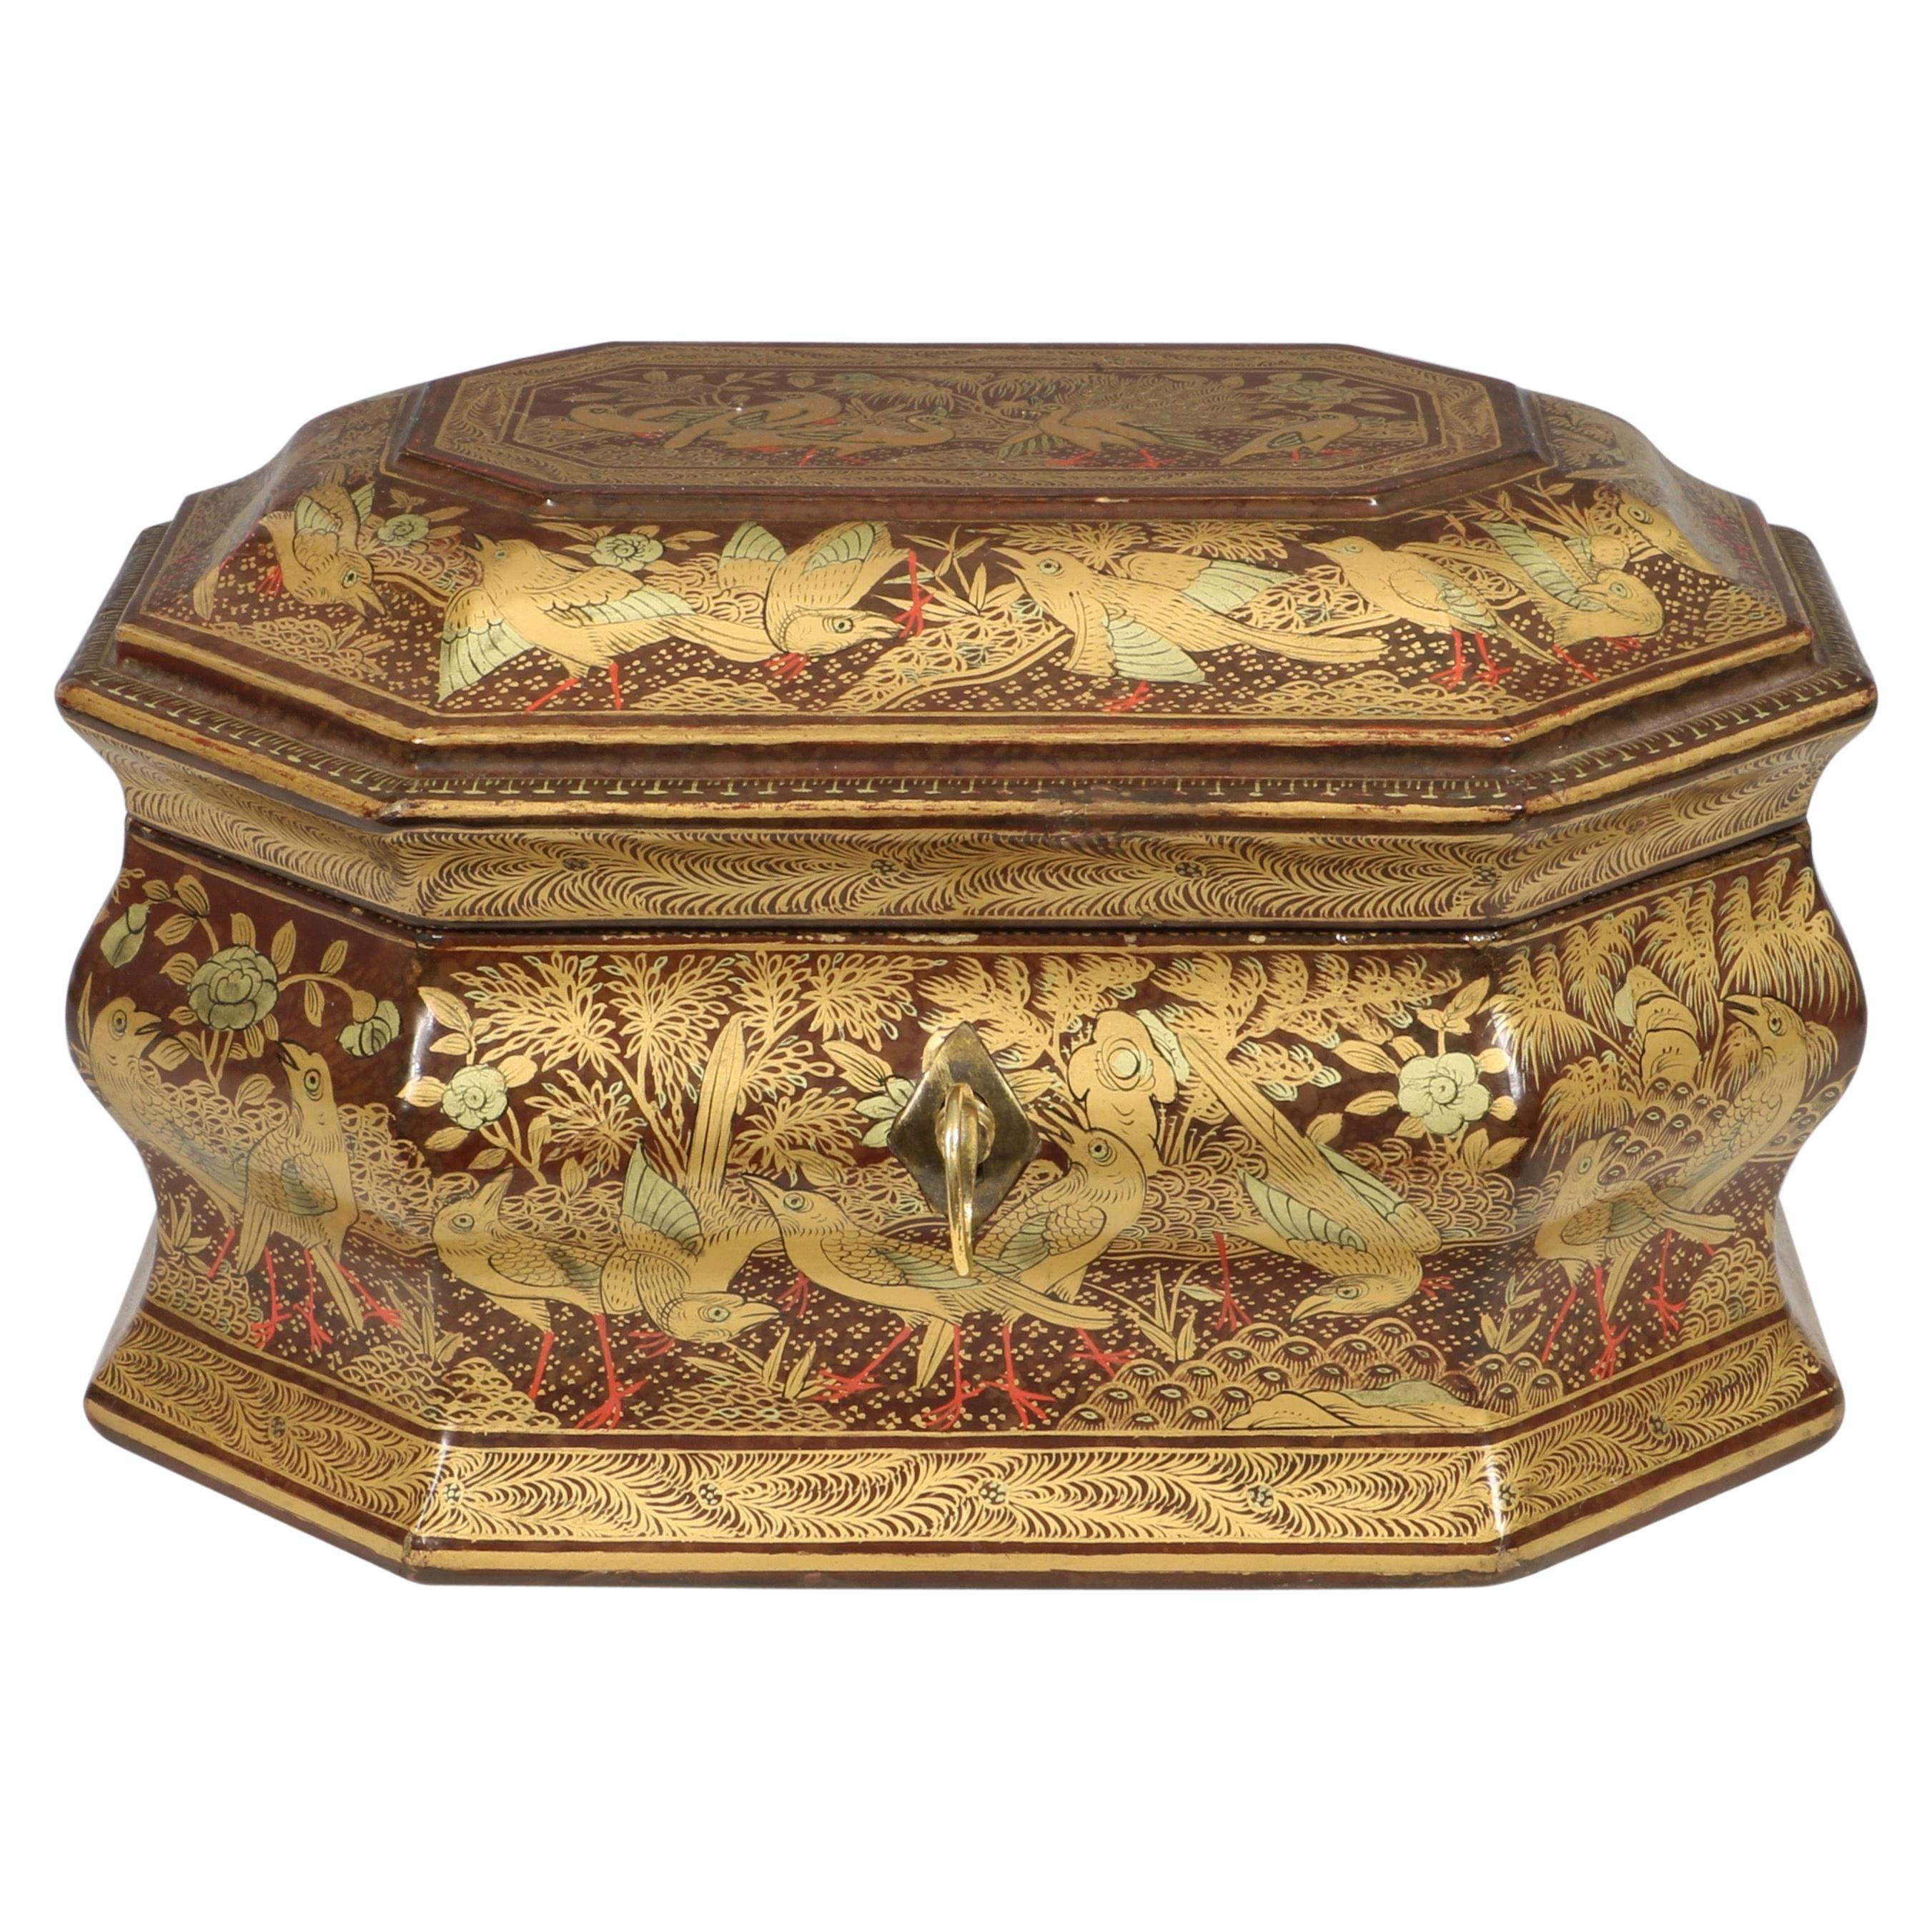 Fine Chinese Canton Lacquer Export Tea Caddy, Mid-19th Century For Sale